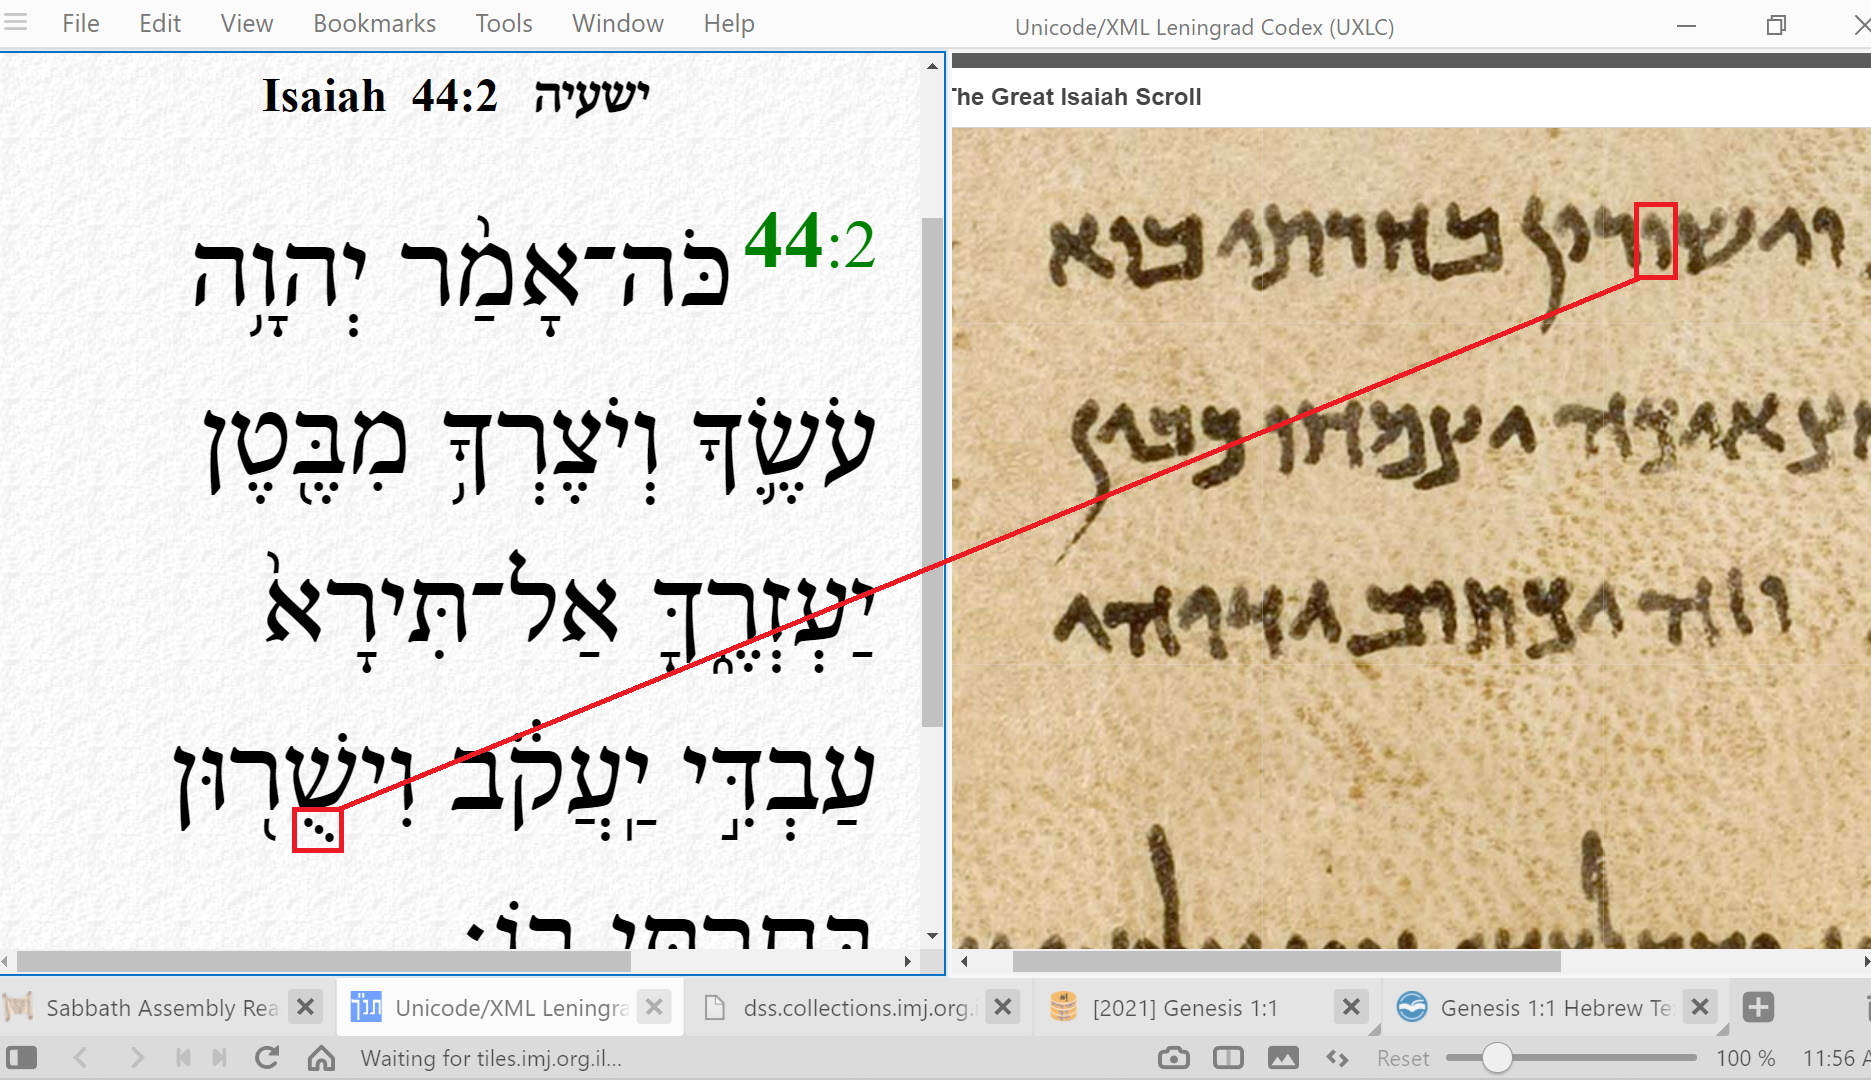 Isaiah 44 verse 2 in the Dead Sea Scrolls compared to the Masoretic Hebrew - Pic 4